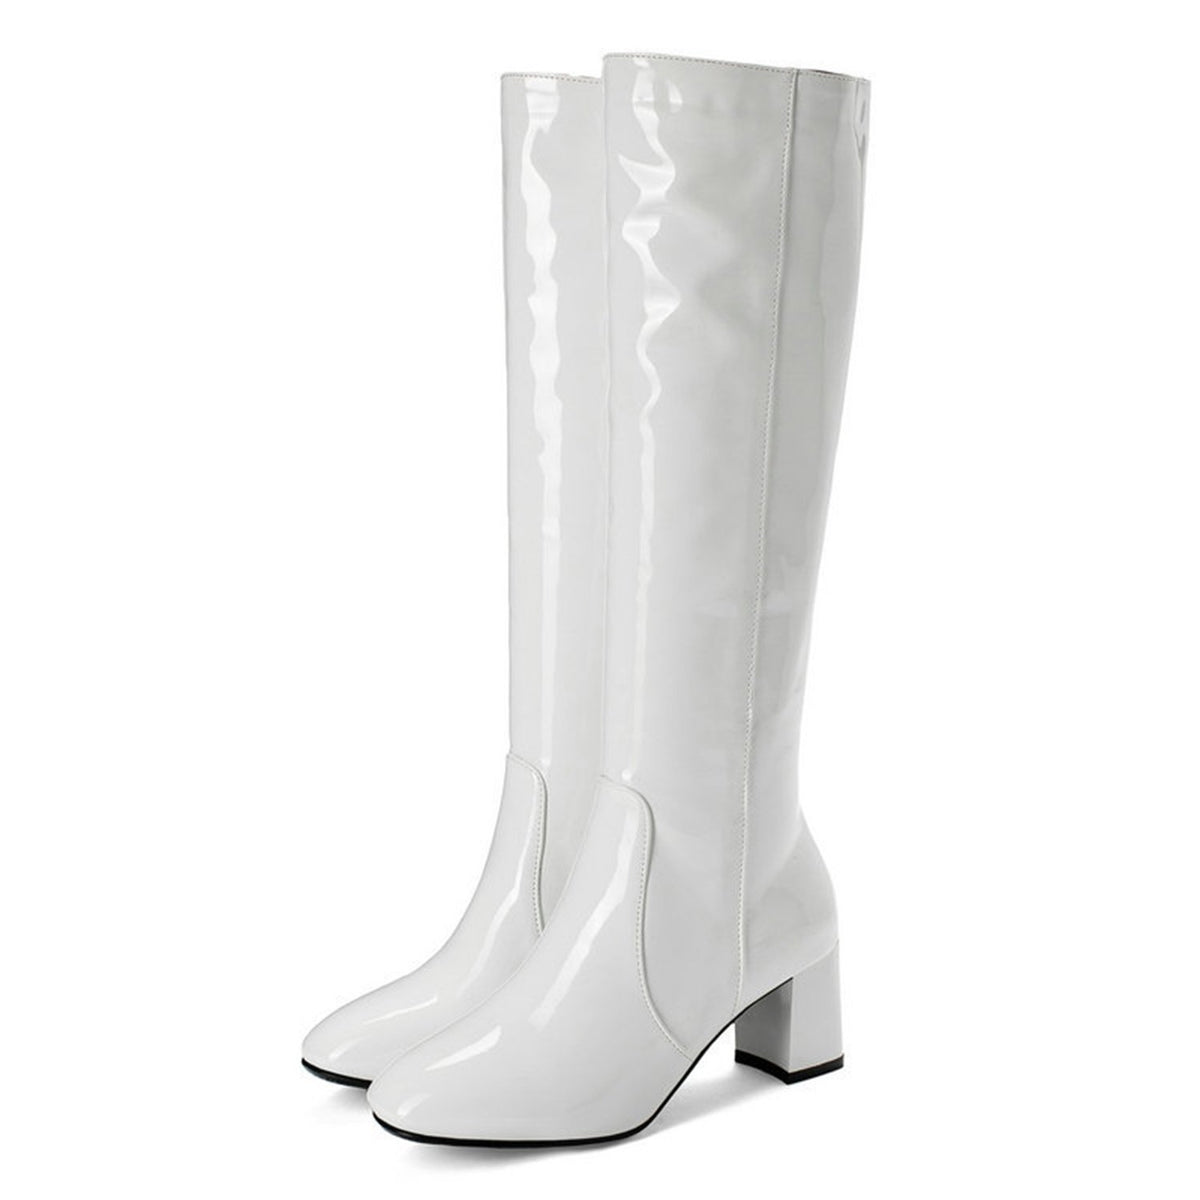 Patent-leather-Knee-High-Long-boots